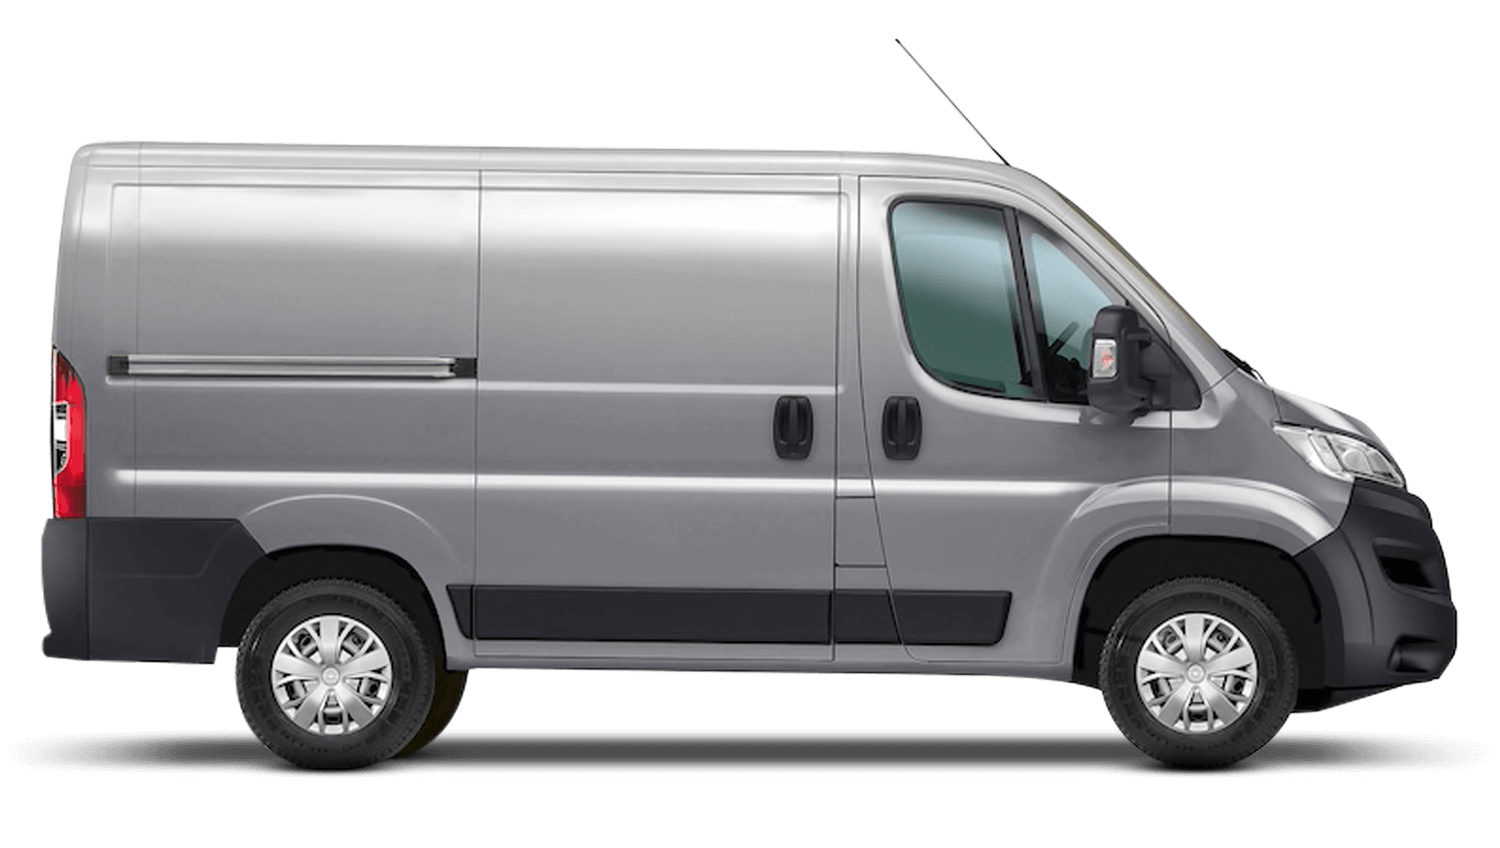 New Movano Business Contract Hire Offer